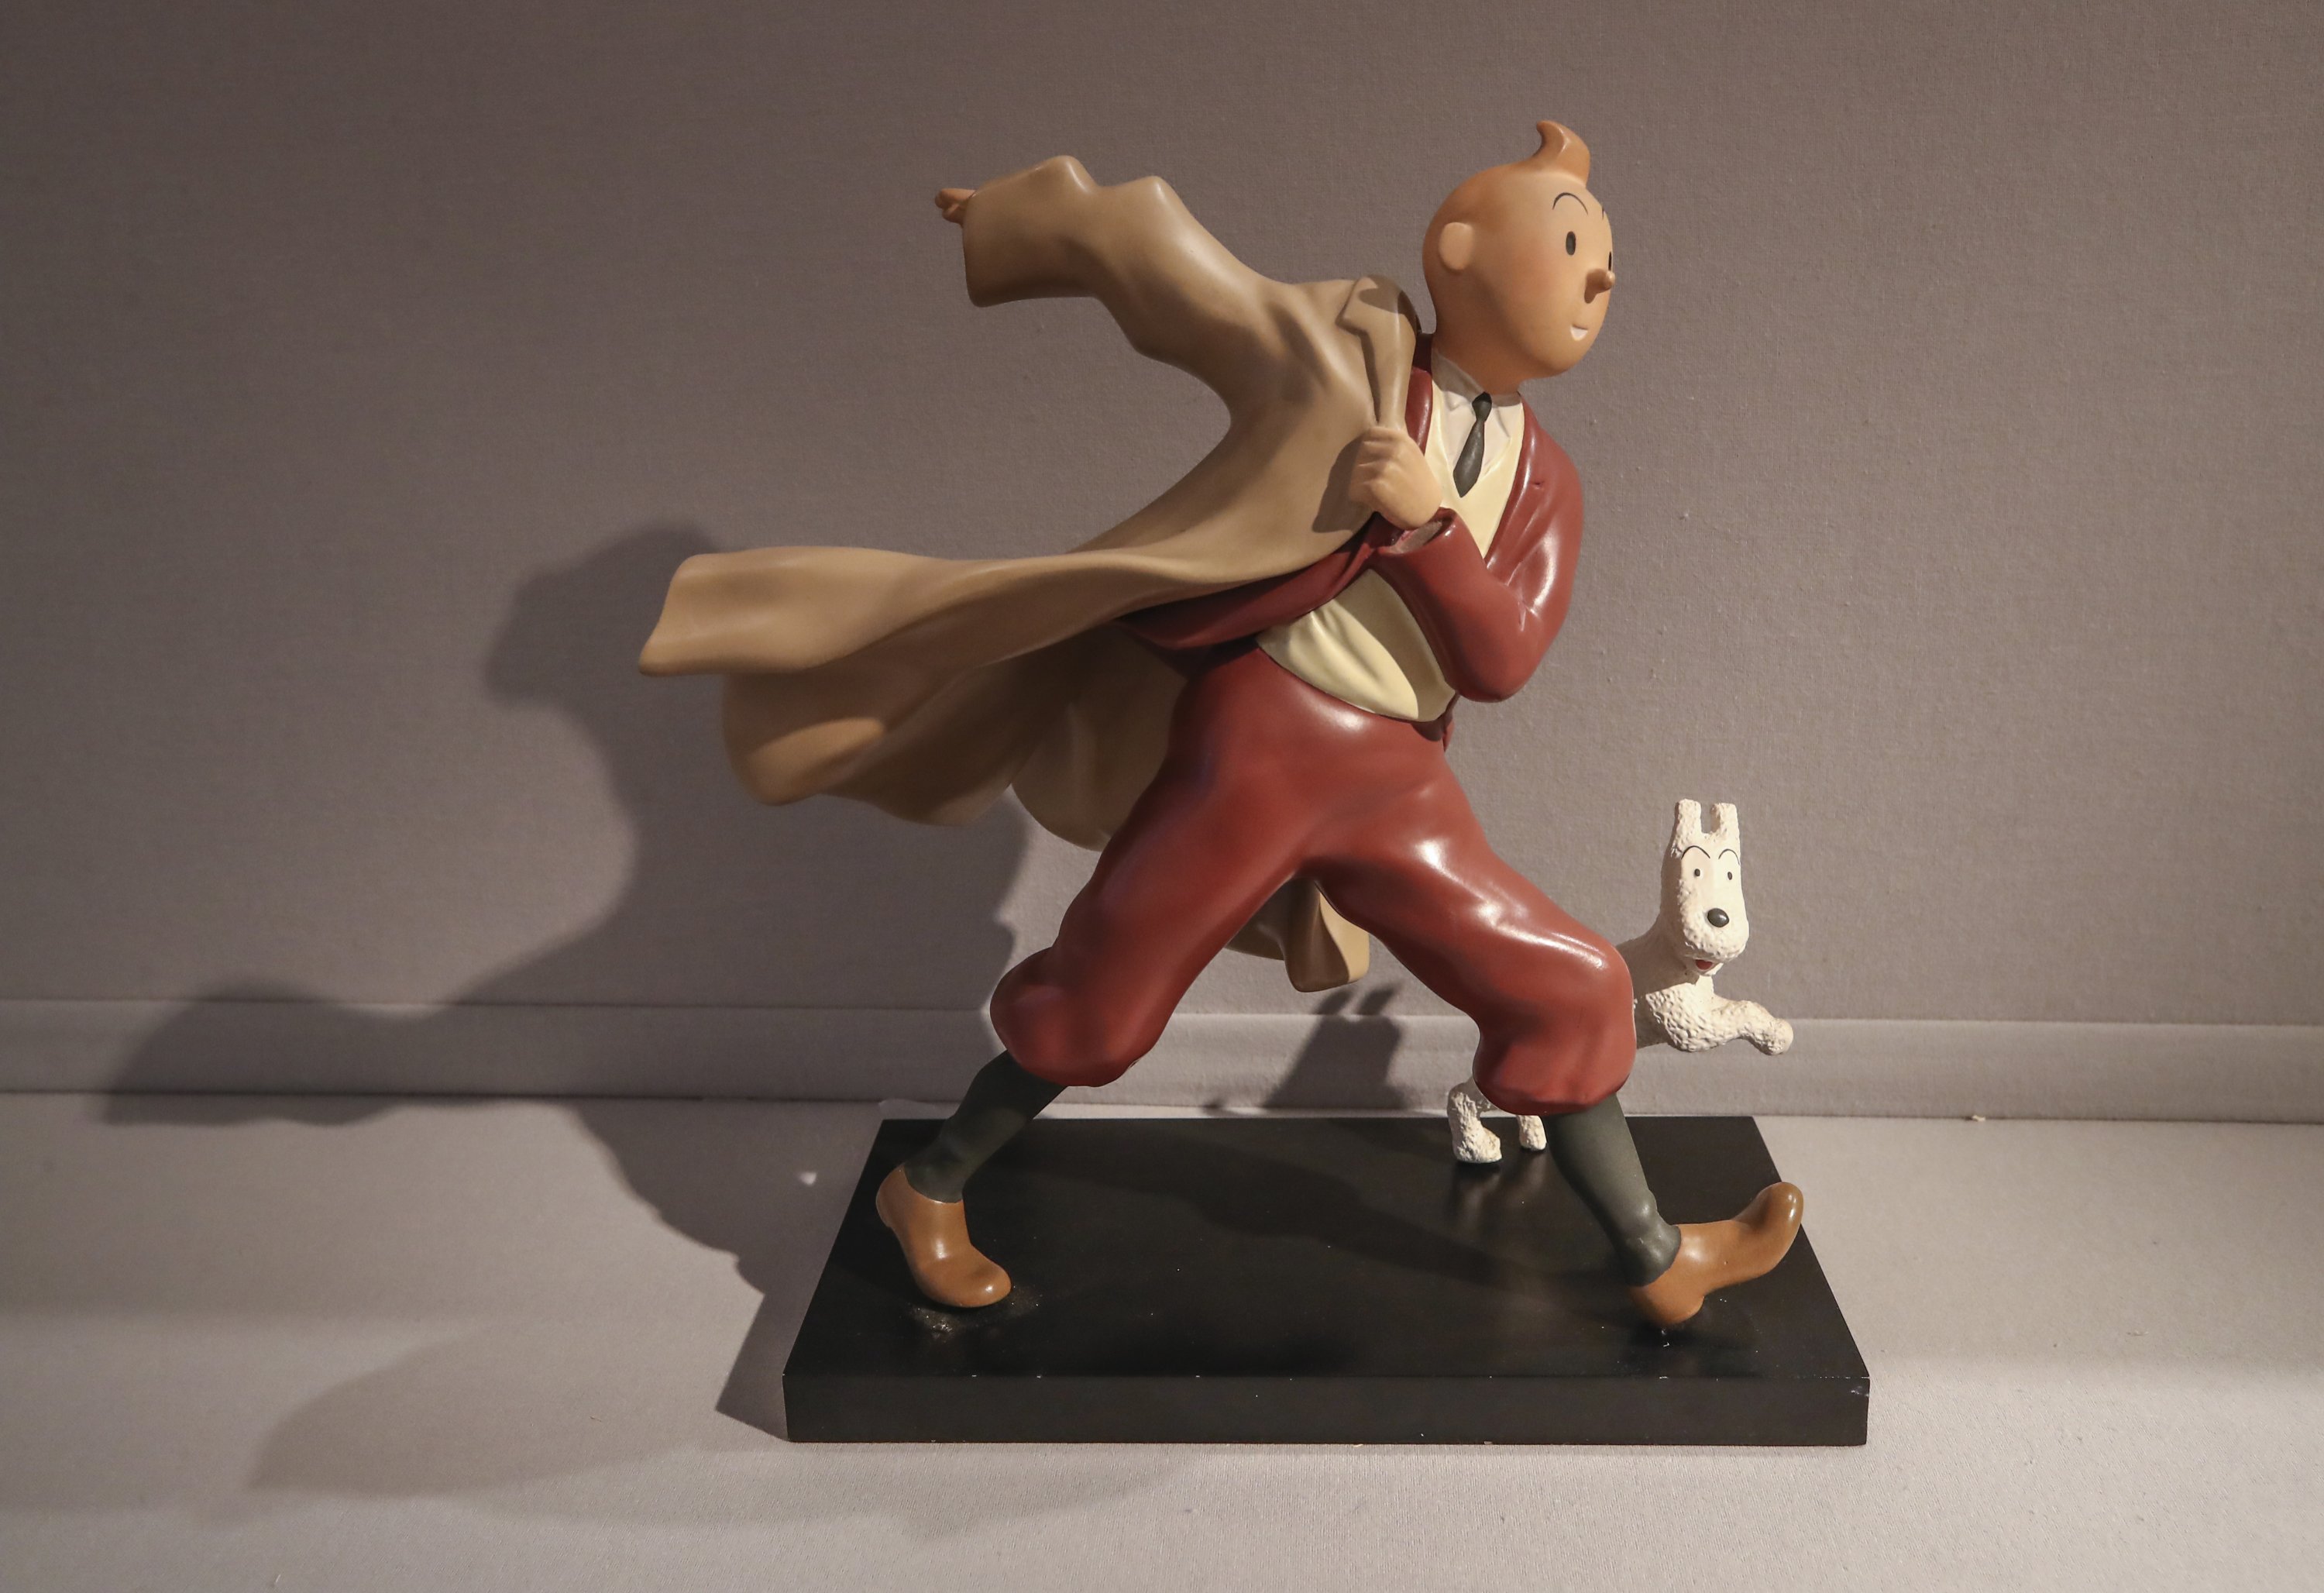 A 1988 polychrome resin sculpture of the comic character Tintin and his dog snowy from the 1941 "The Crab with the Golden Claws" album drawn by Belgian creator Herge is displayed at the Artcurial auction house in Paris on Jan. 13, 2021. (AP Photo)